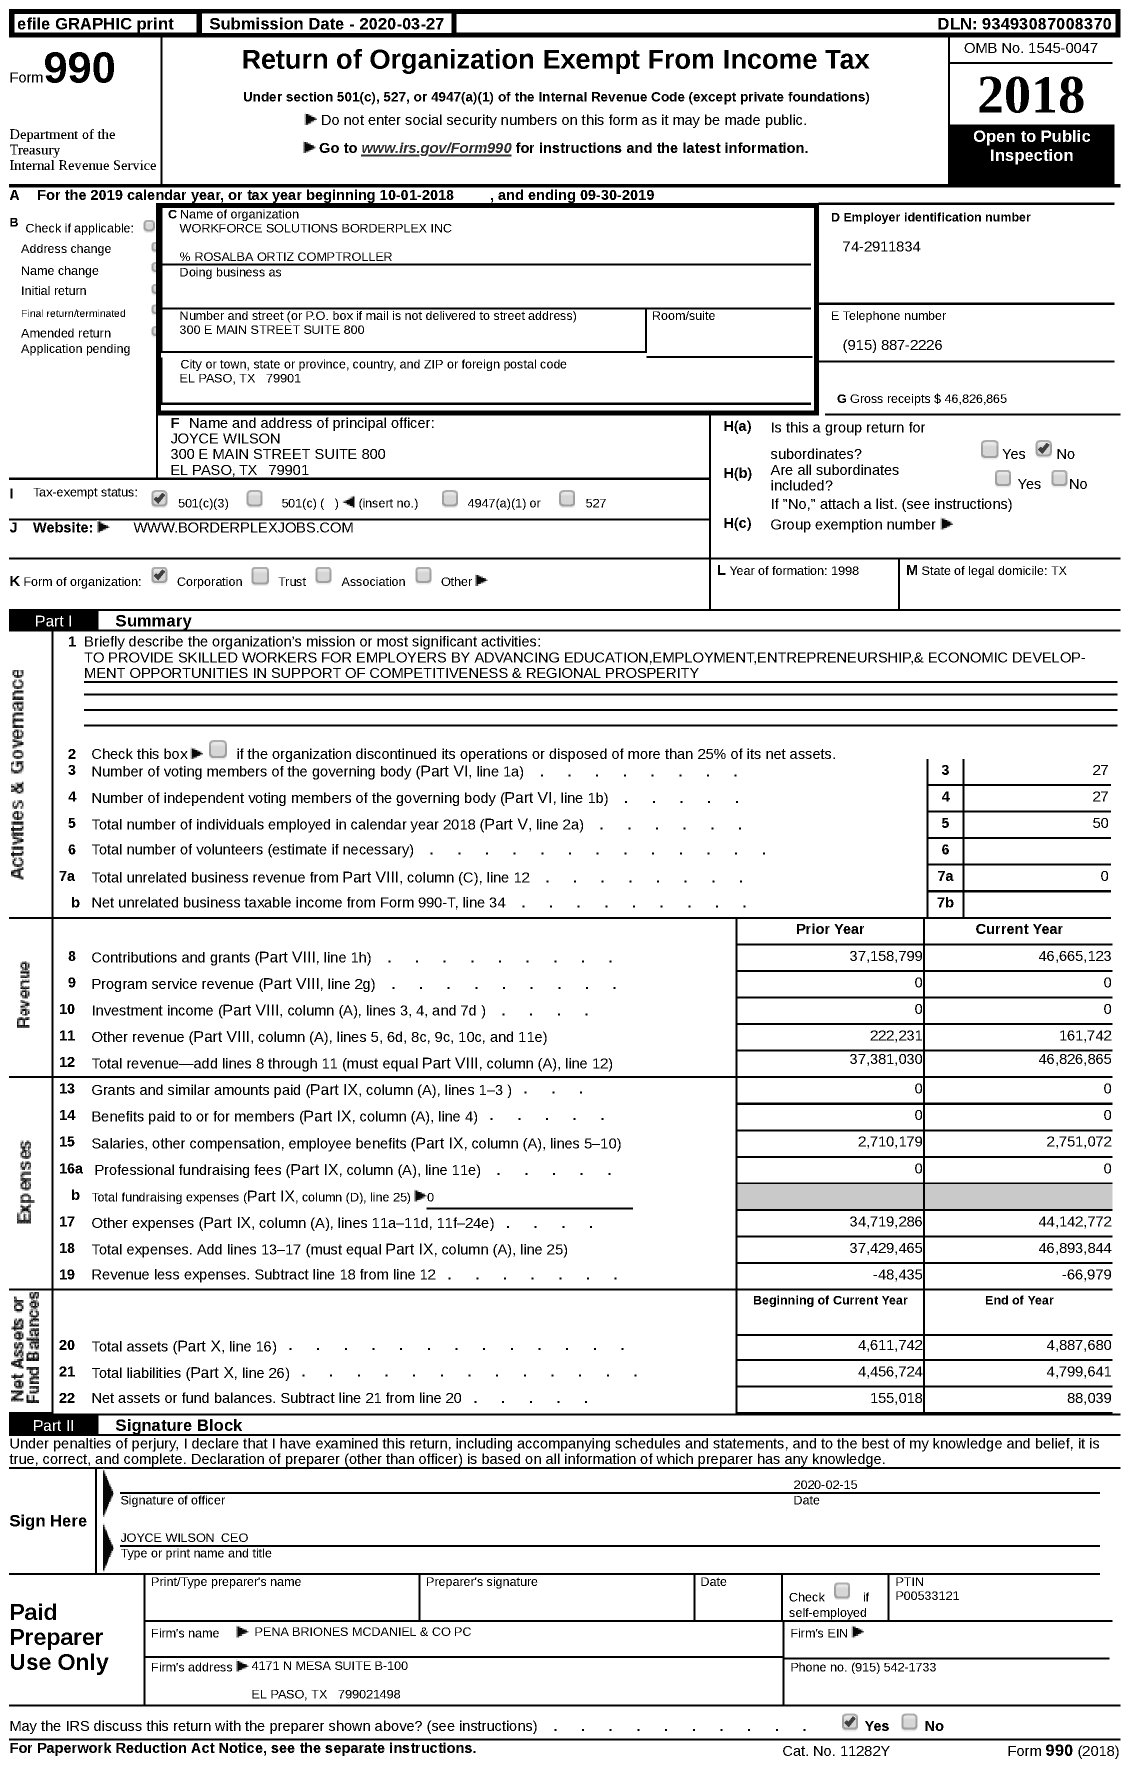 Image of first page of 2018 Form 990 for Workforce Solutions Borderplex